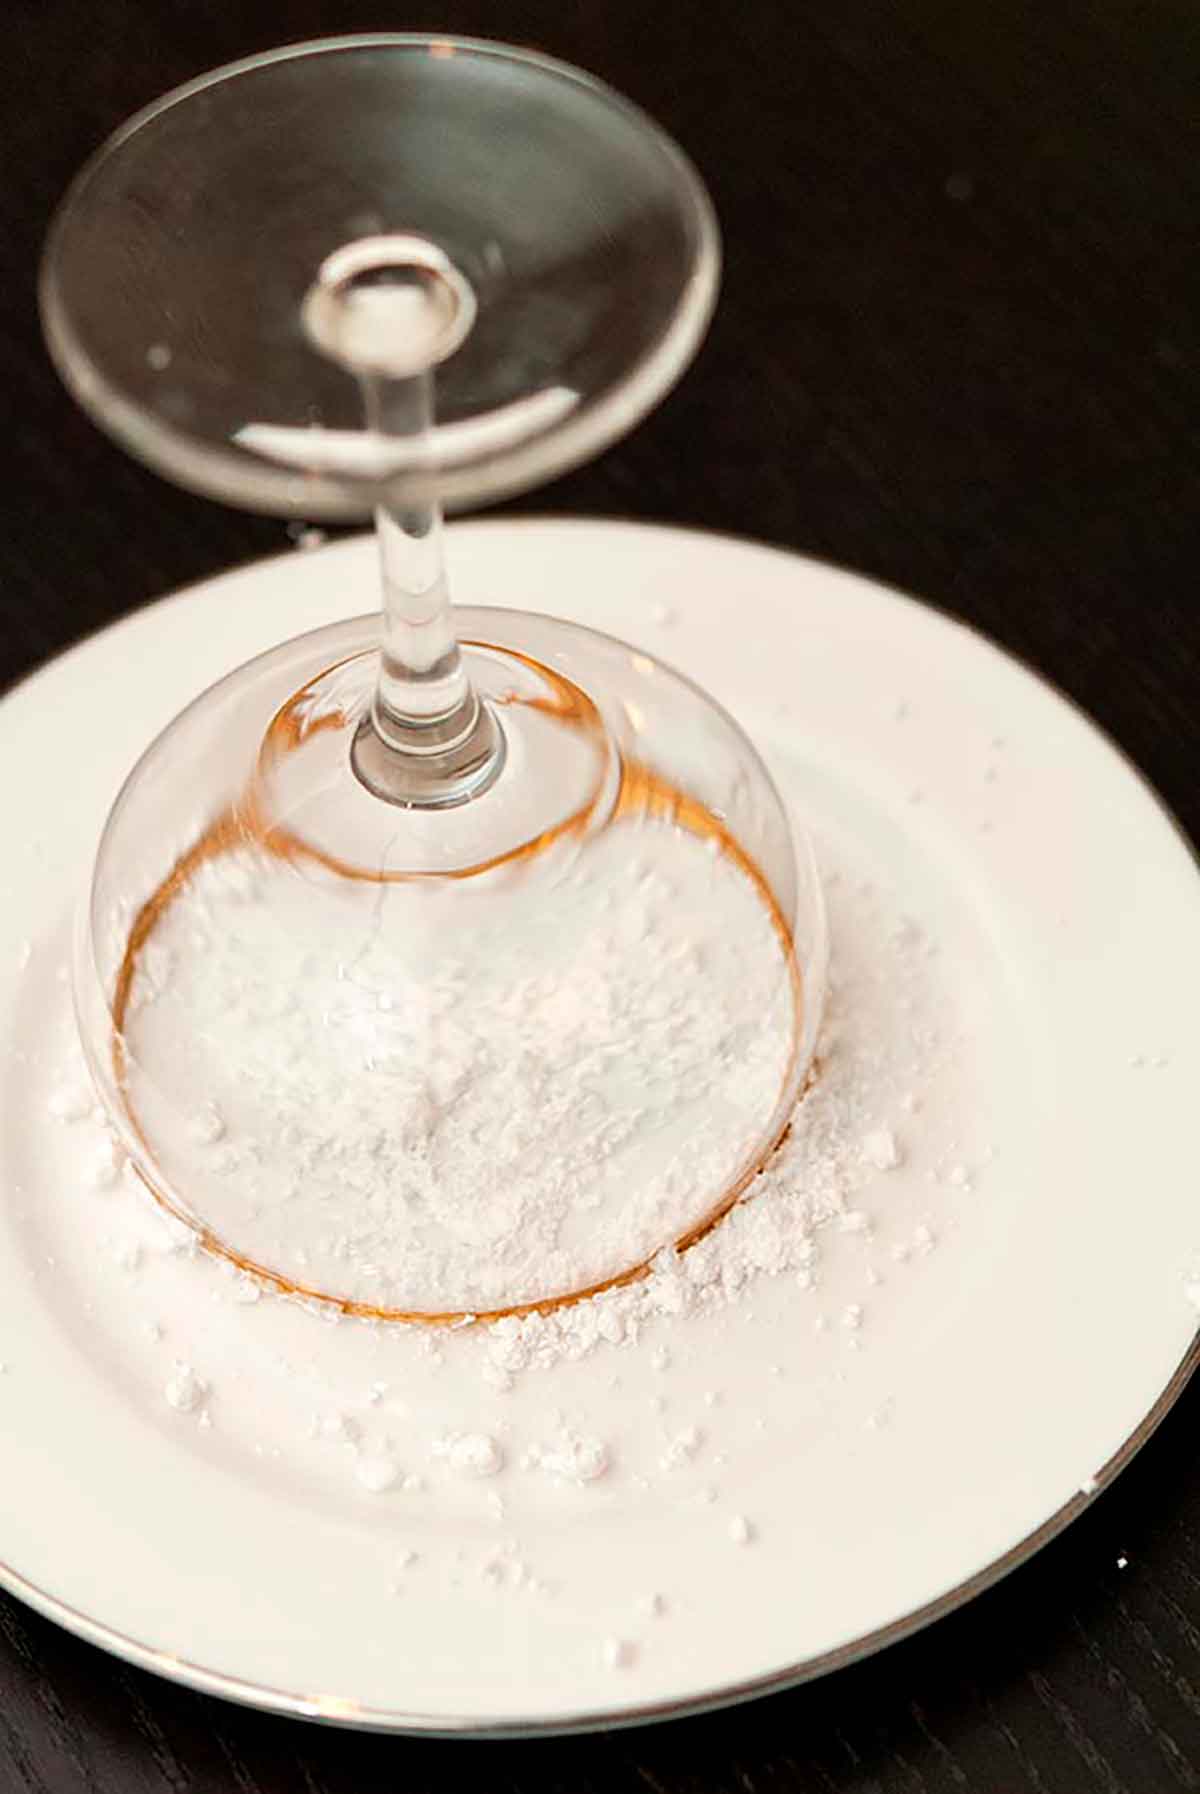 A cocktail glass pressed into powdered sugar on a white plate.